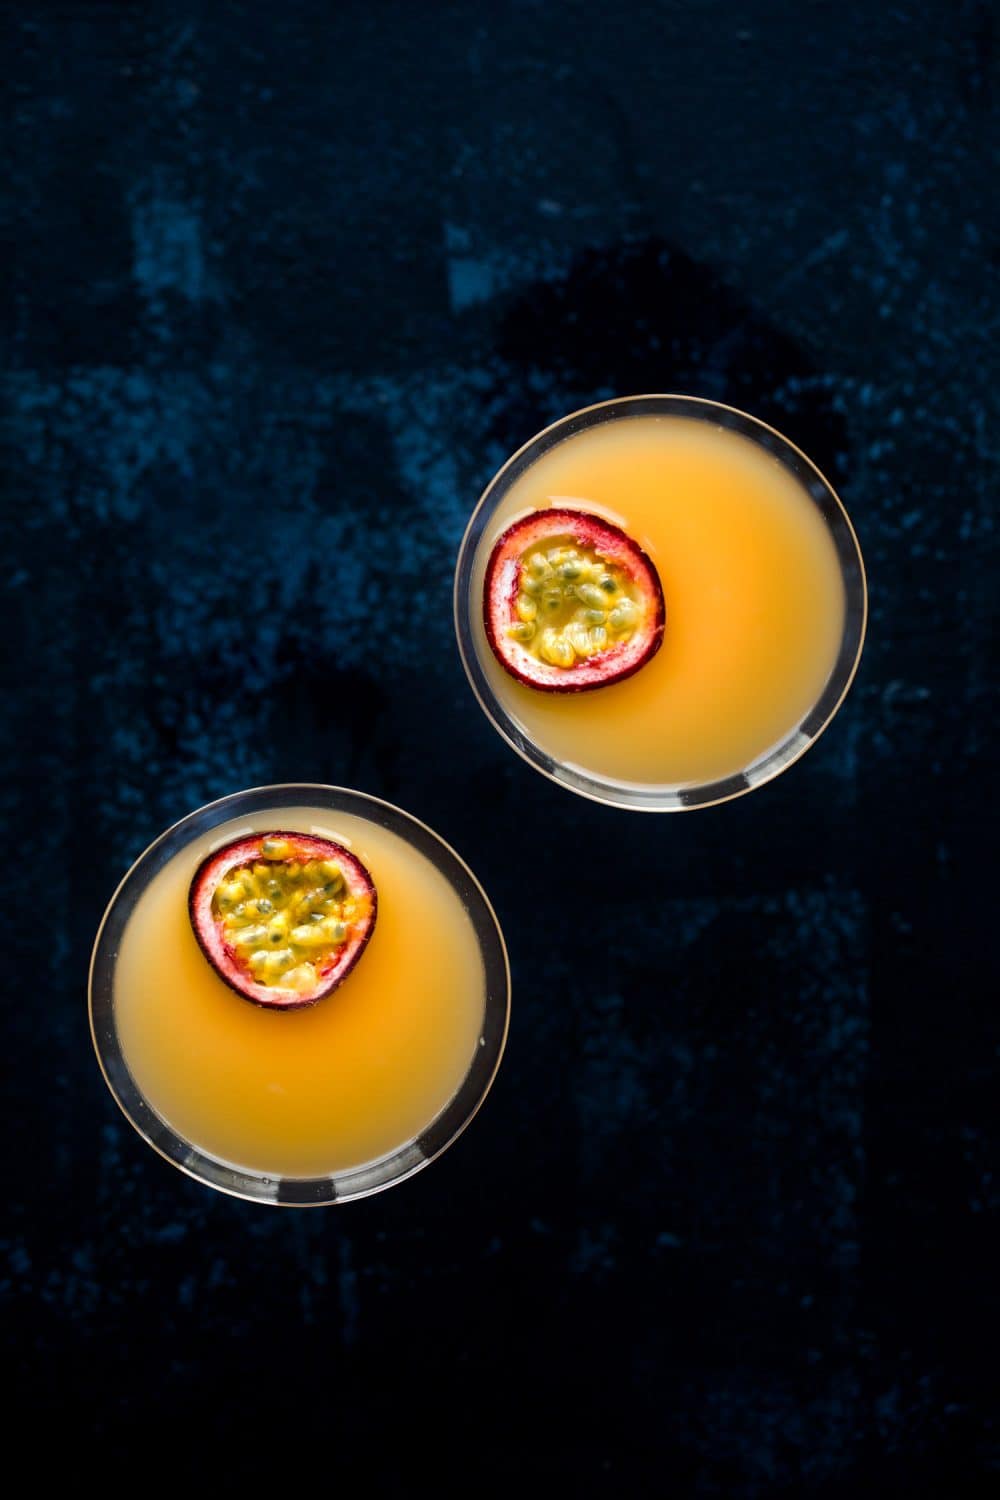 Overhead view of two pornstar martini cocktails with passion fruit slices floating on top. 